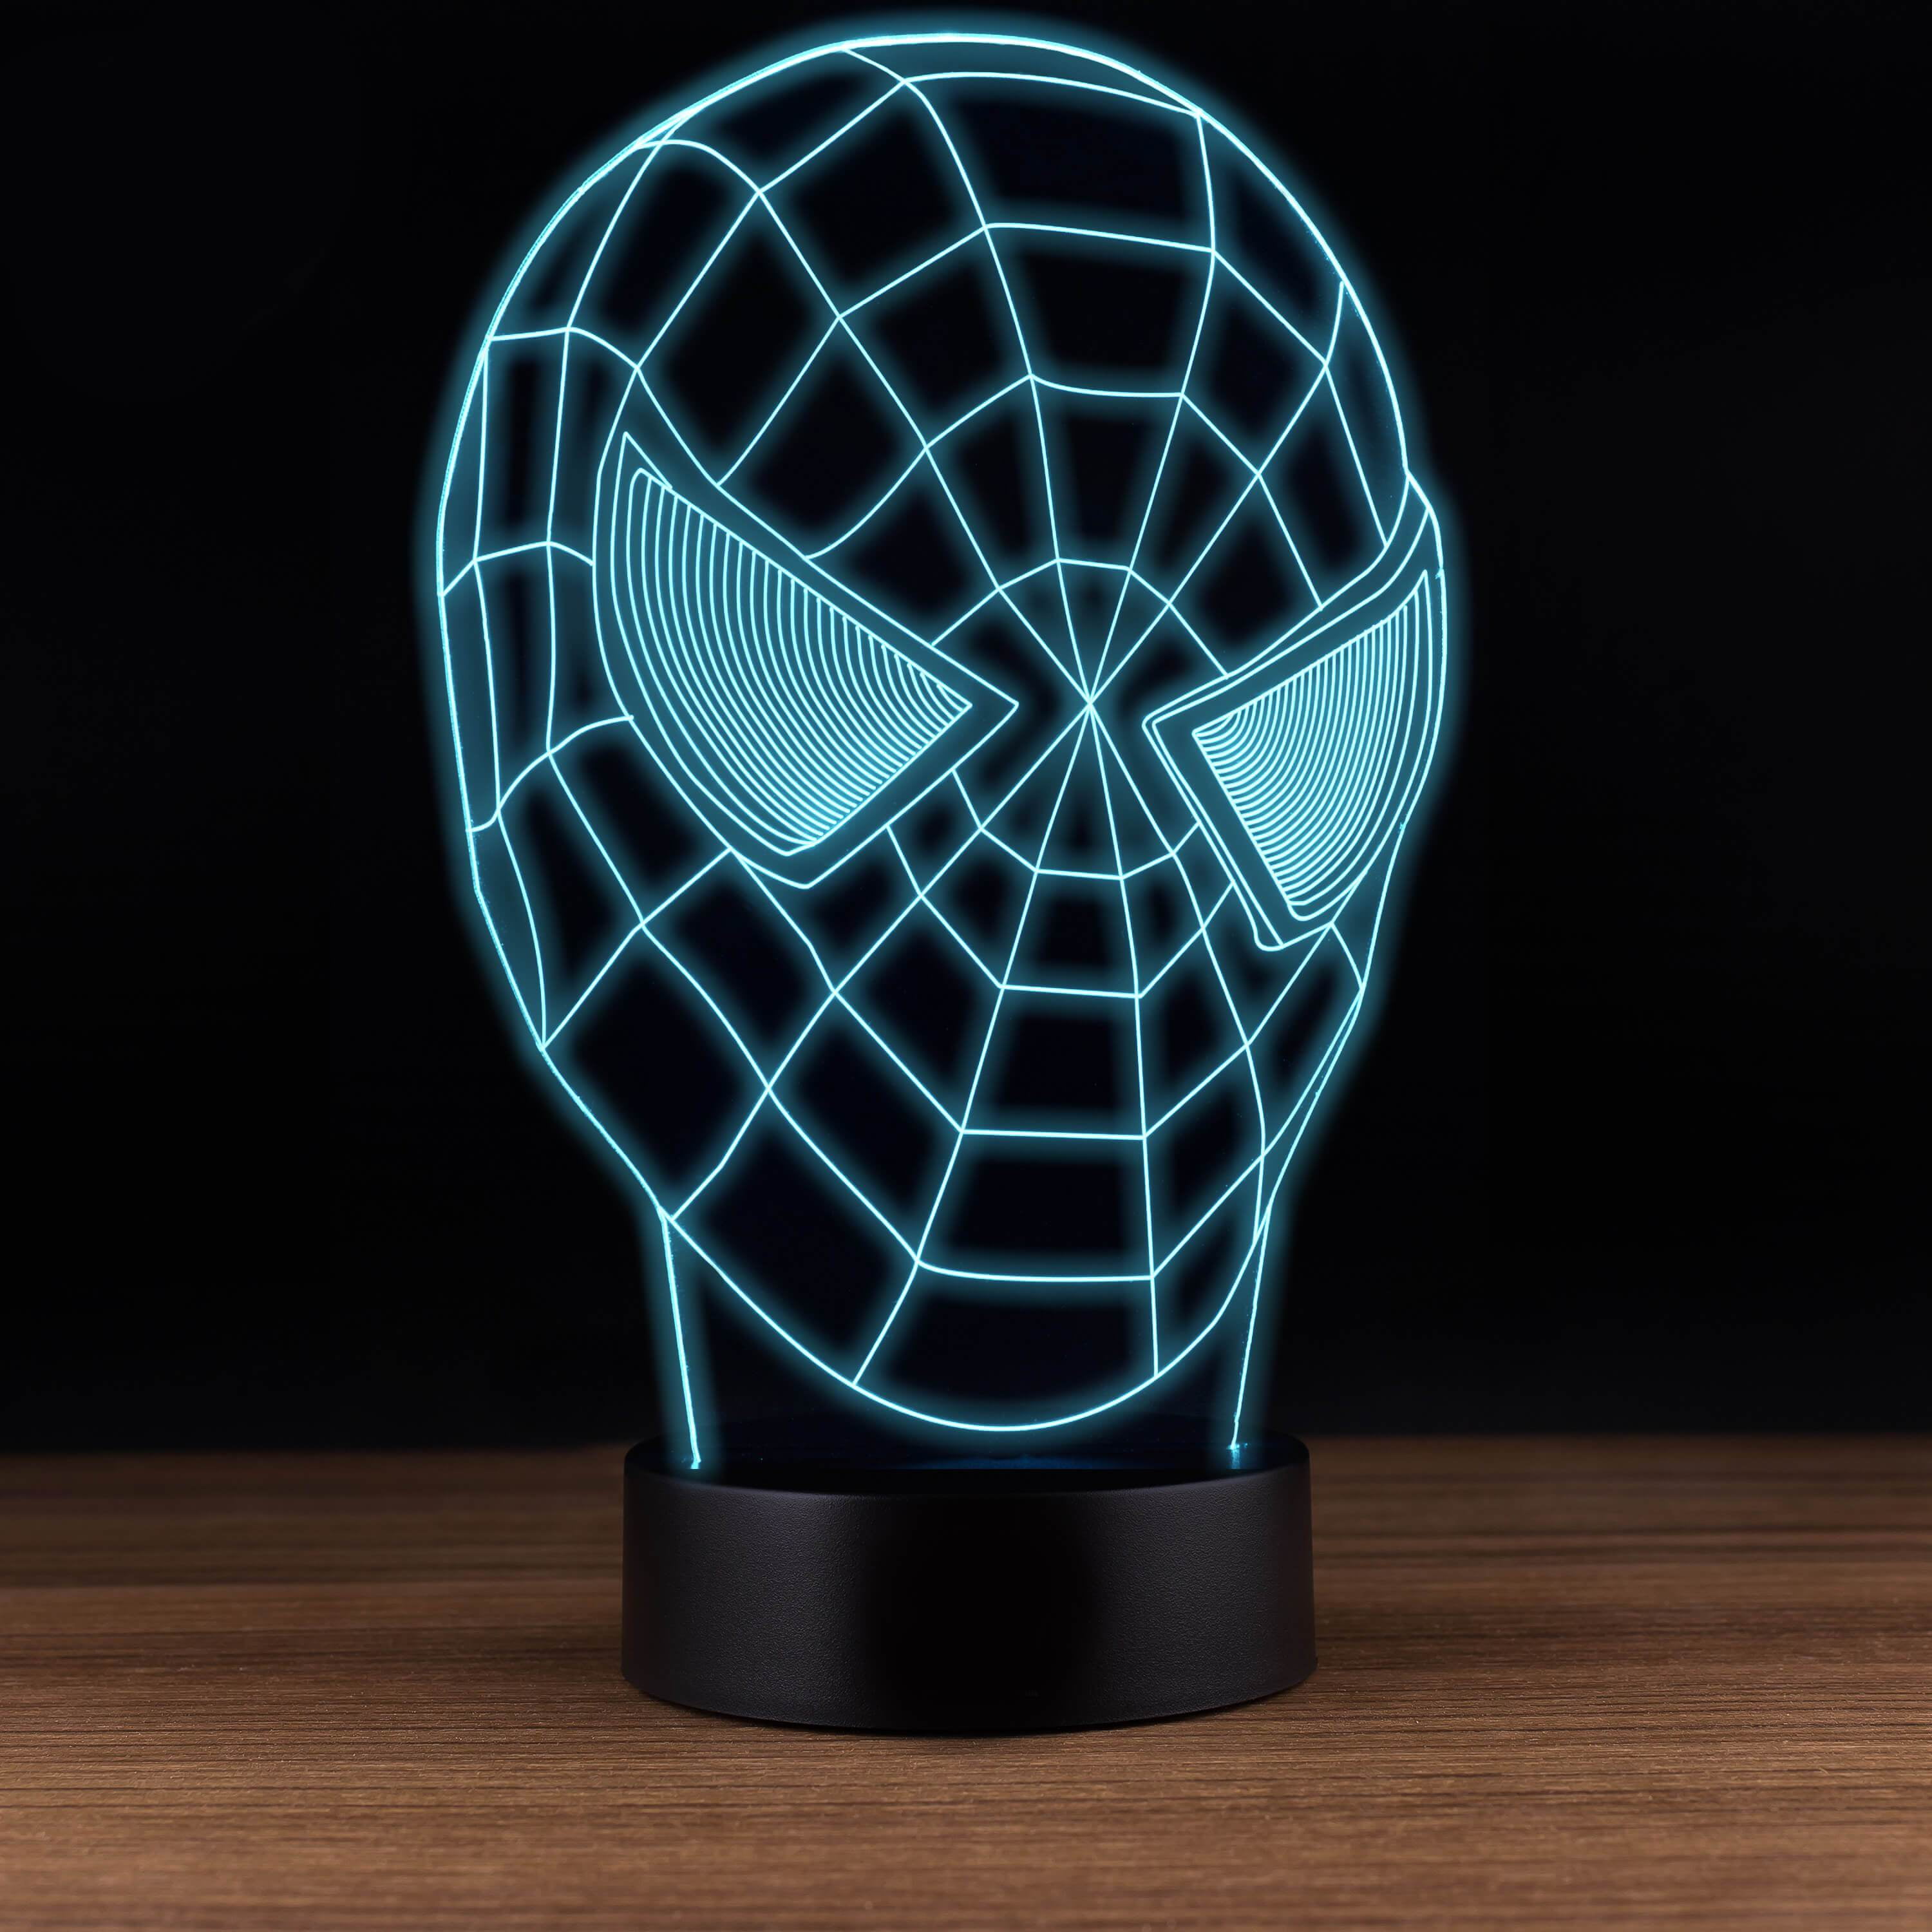 Super Hero Spider Man 3D LED Night Light Touch Switch Table Desk Lamp Toy Gift 